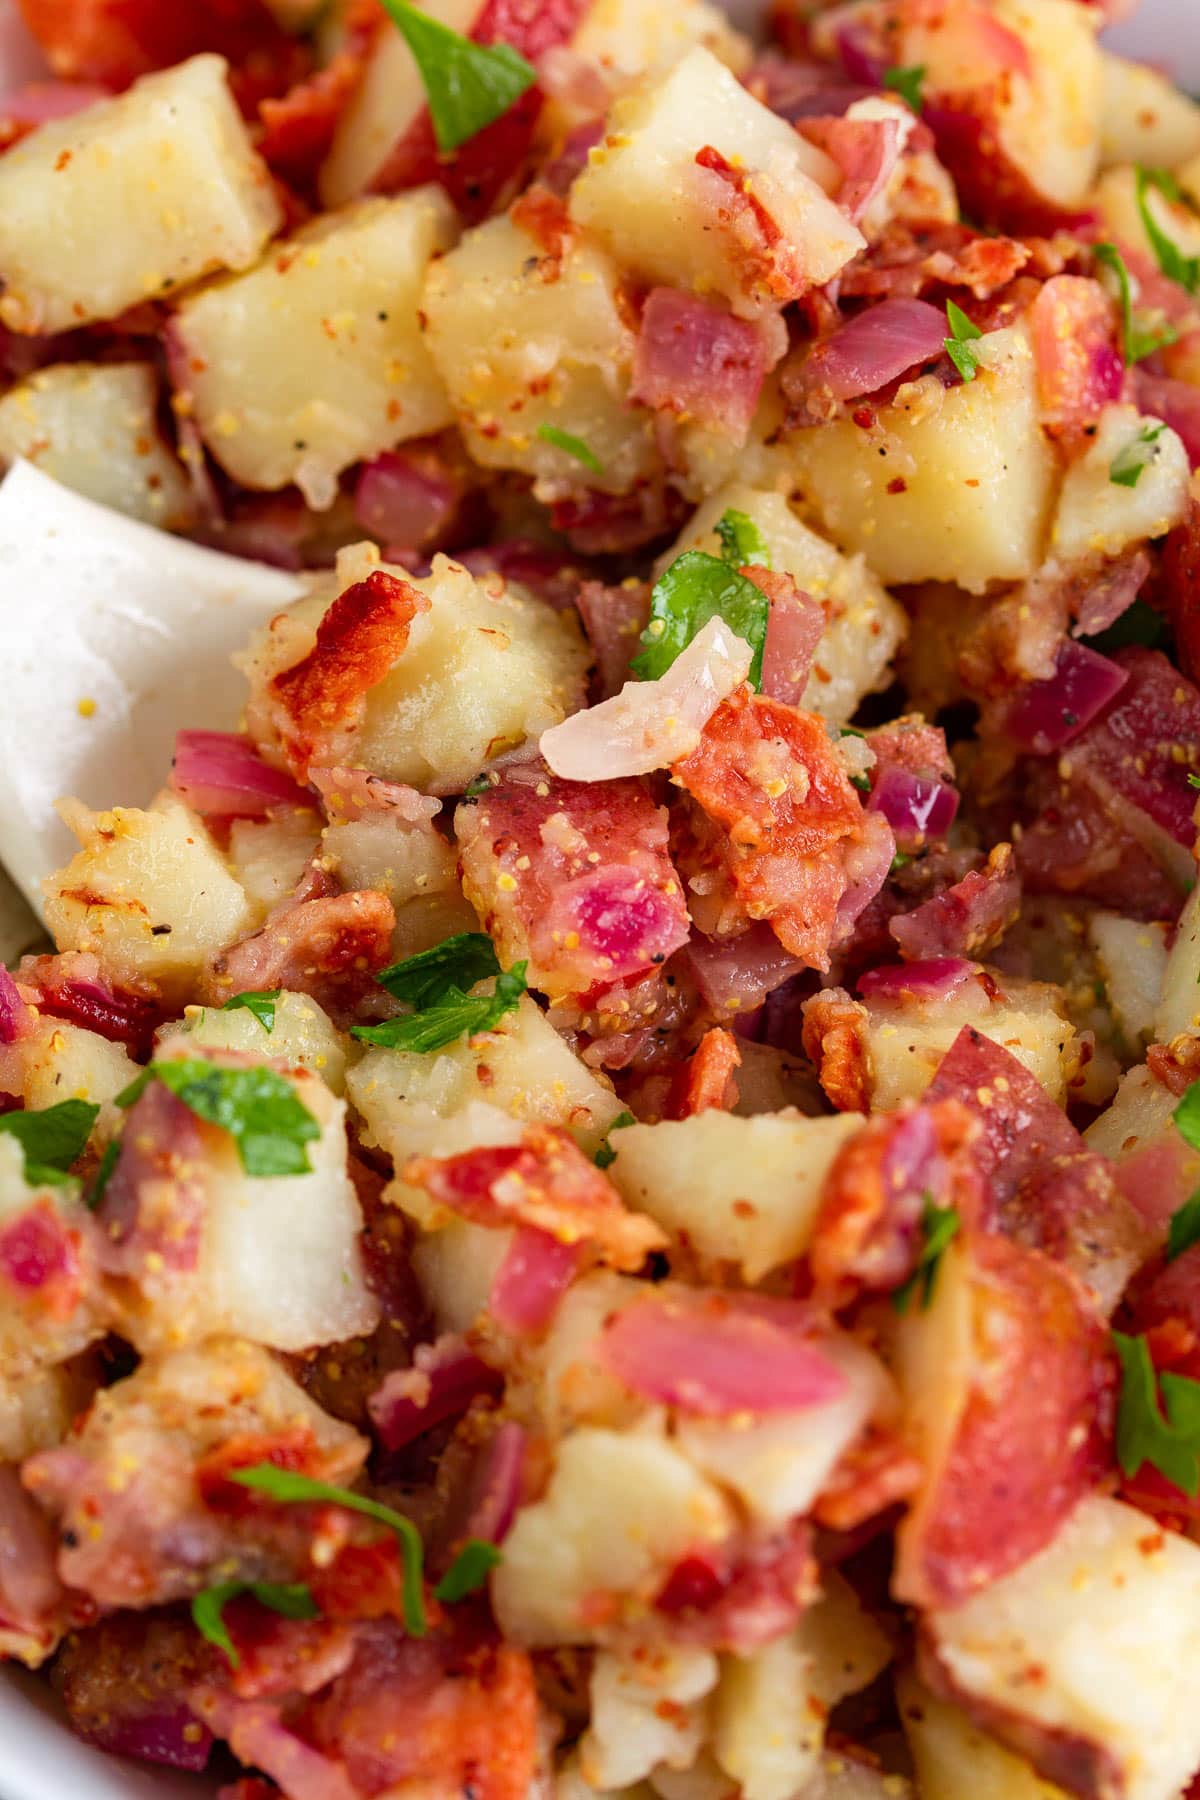 A close up image of German potato salad topped with freshly chopped parsley.